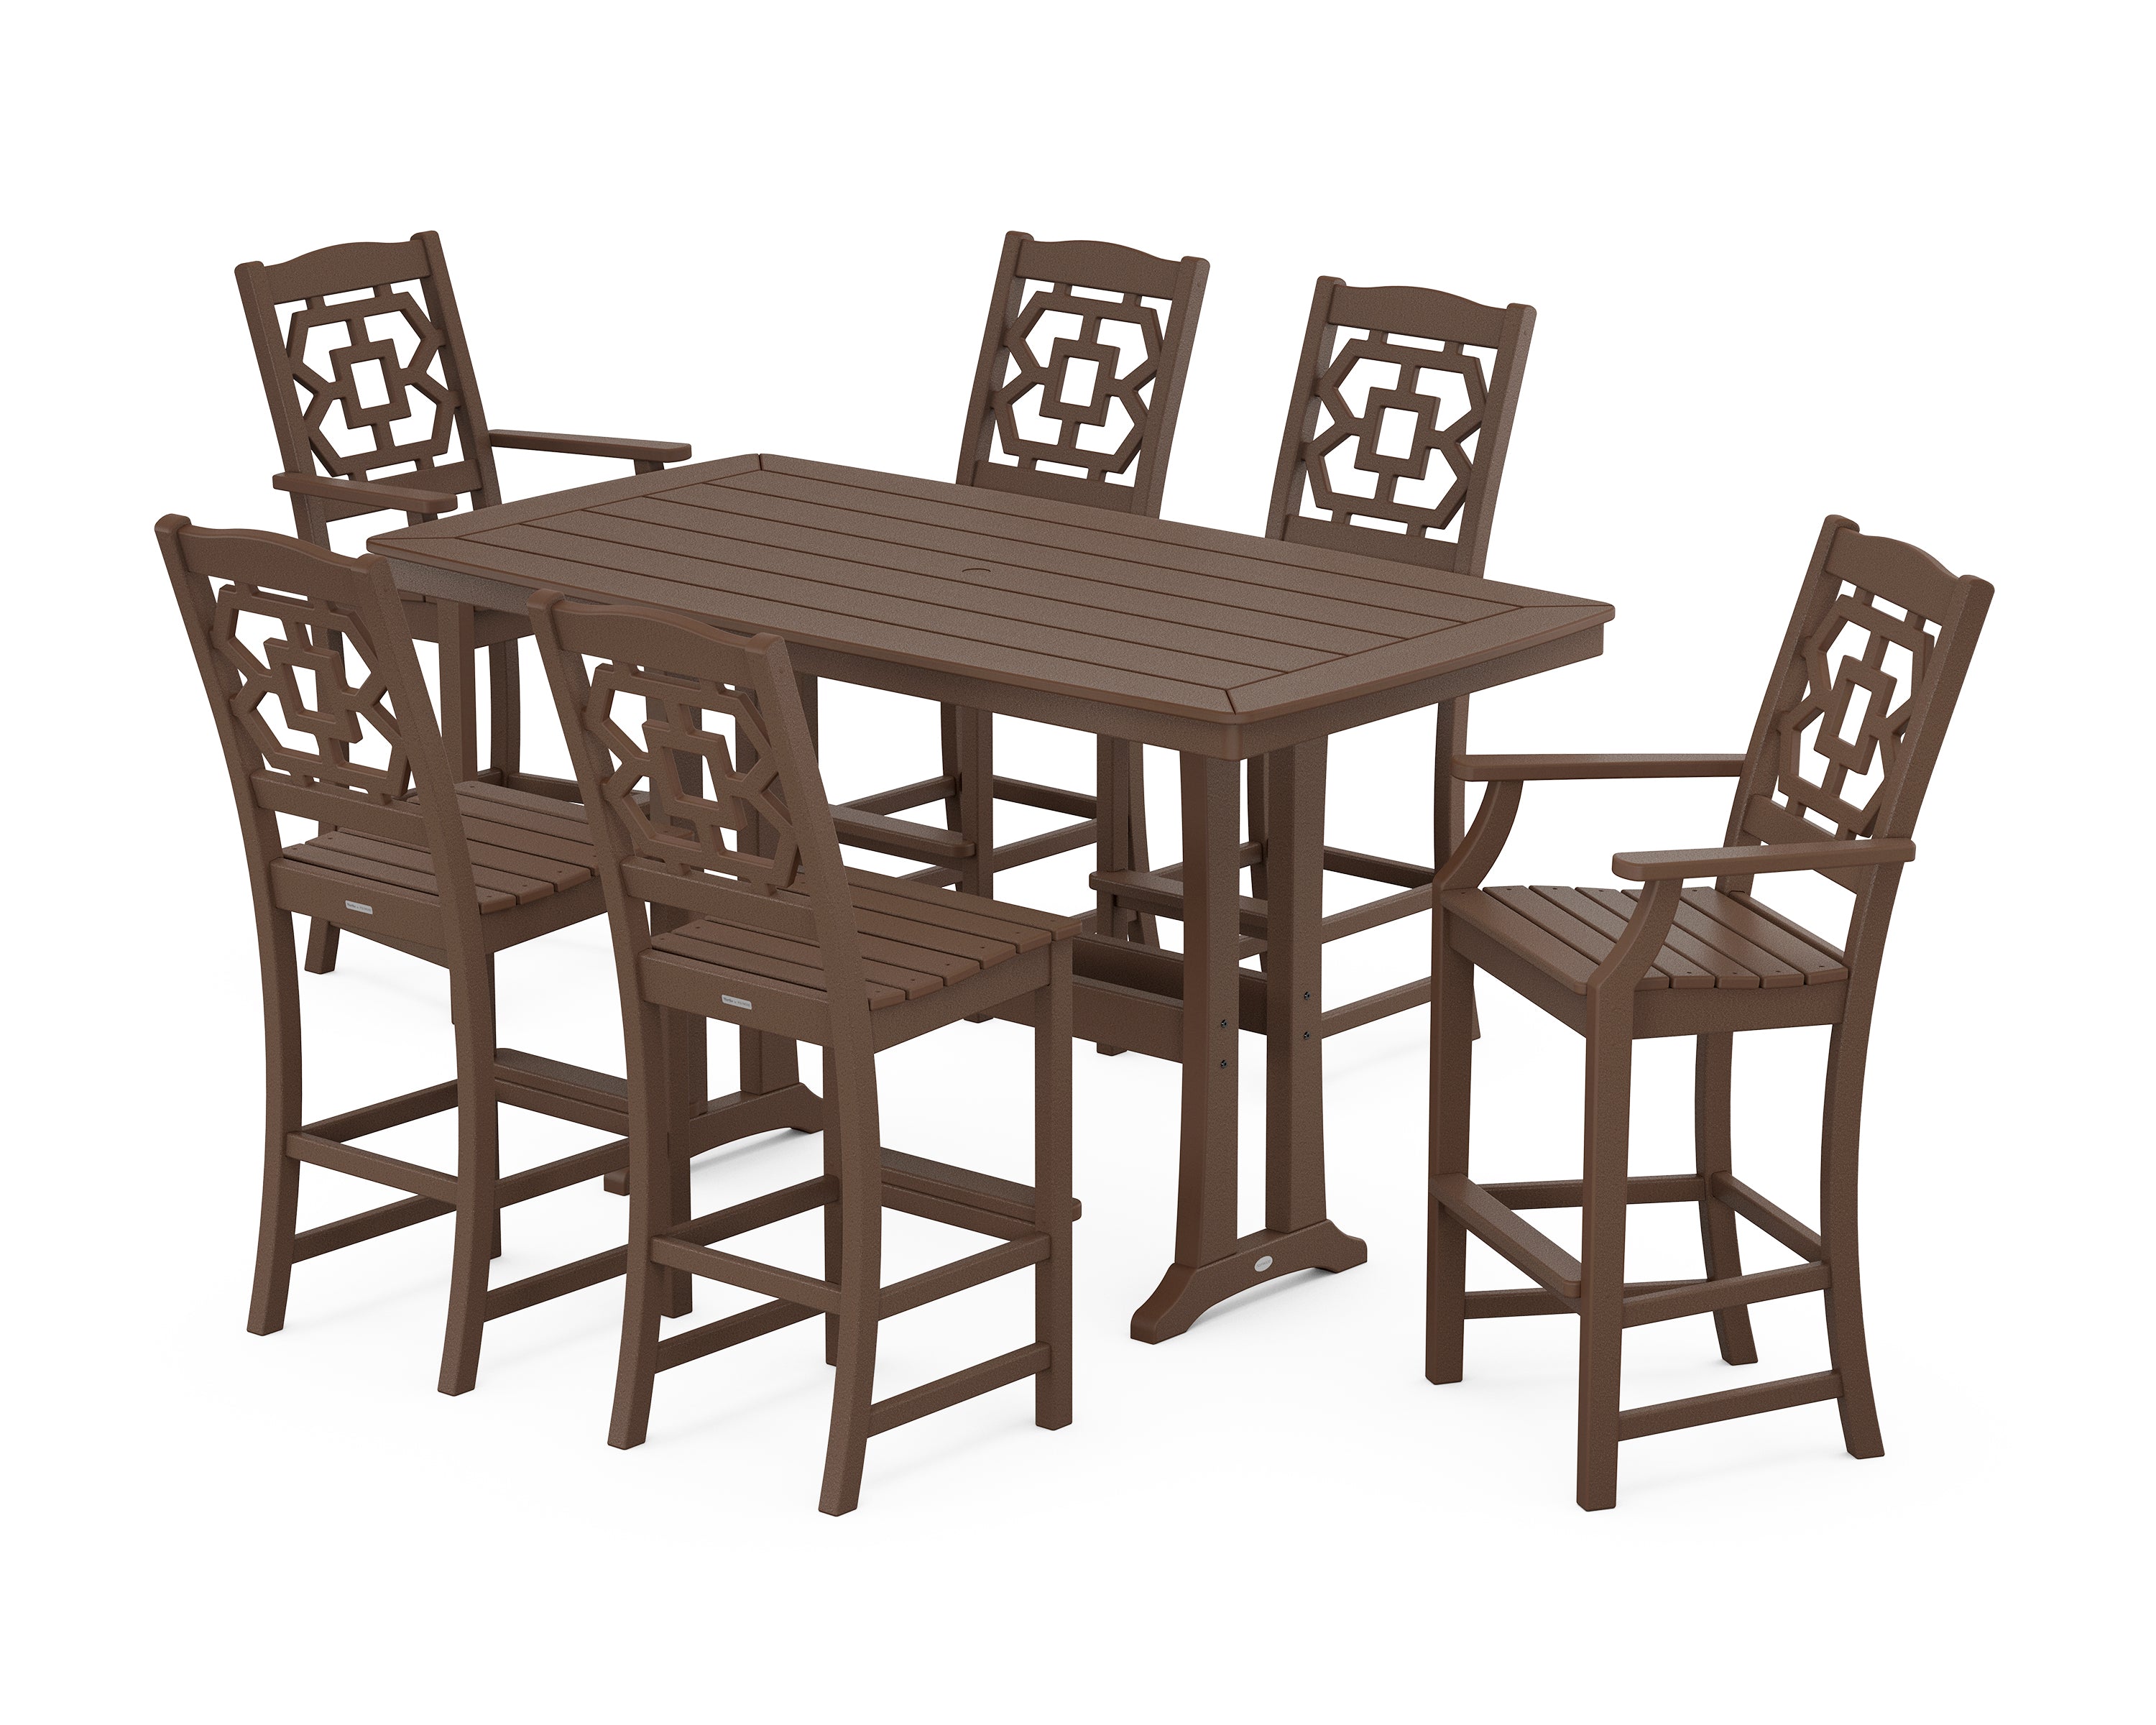 Martha Stewart by POLYWOOD® Chinoiserie 7-Piece Bar Set with Trestle Legs in Mahogany